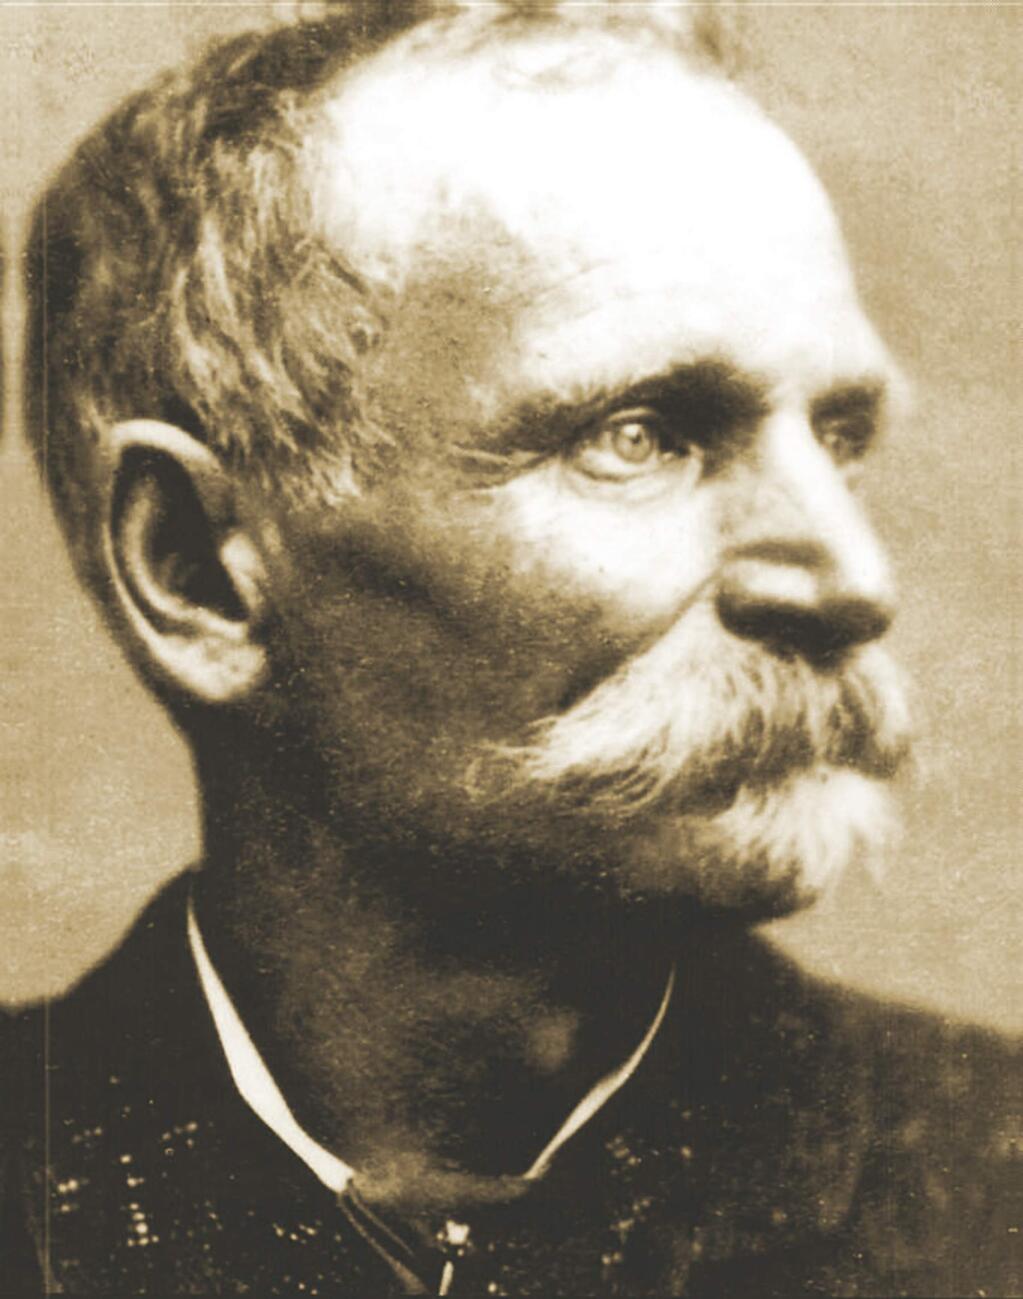 Charles E. Boles, 'Black Bart,' from the cover of the book, 'Black Bart: Boulevardier Bandit: The Saga of California's Most Mysterious Stagecoach Robber and the Men Who Sought to Capture Him.'